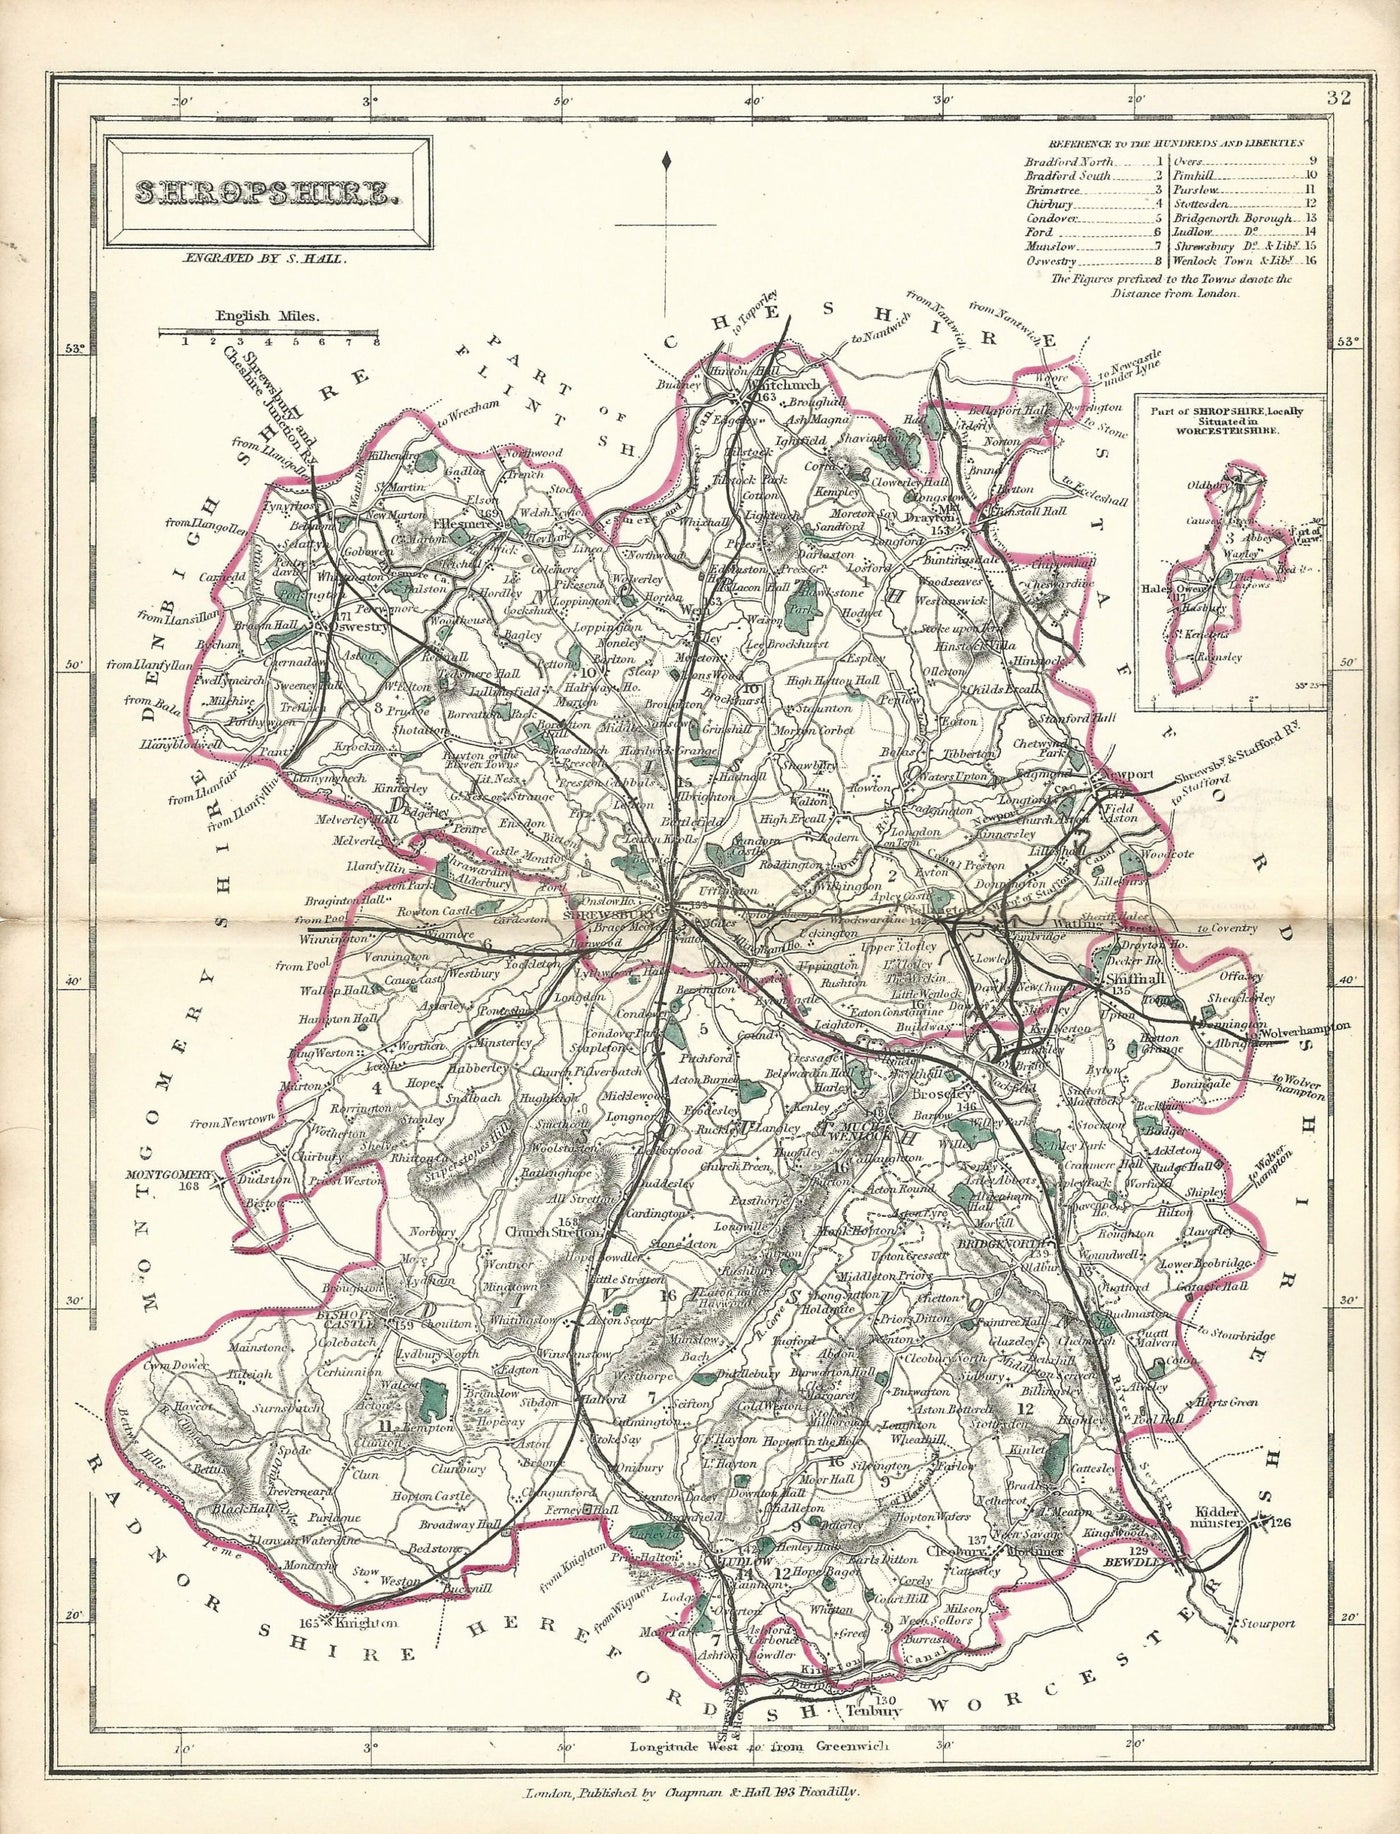 Shropshire antique map from English Counties1860